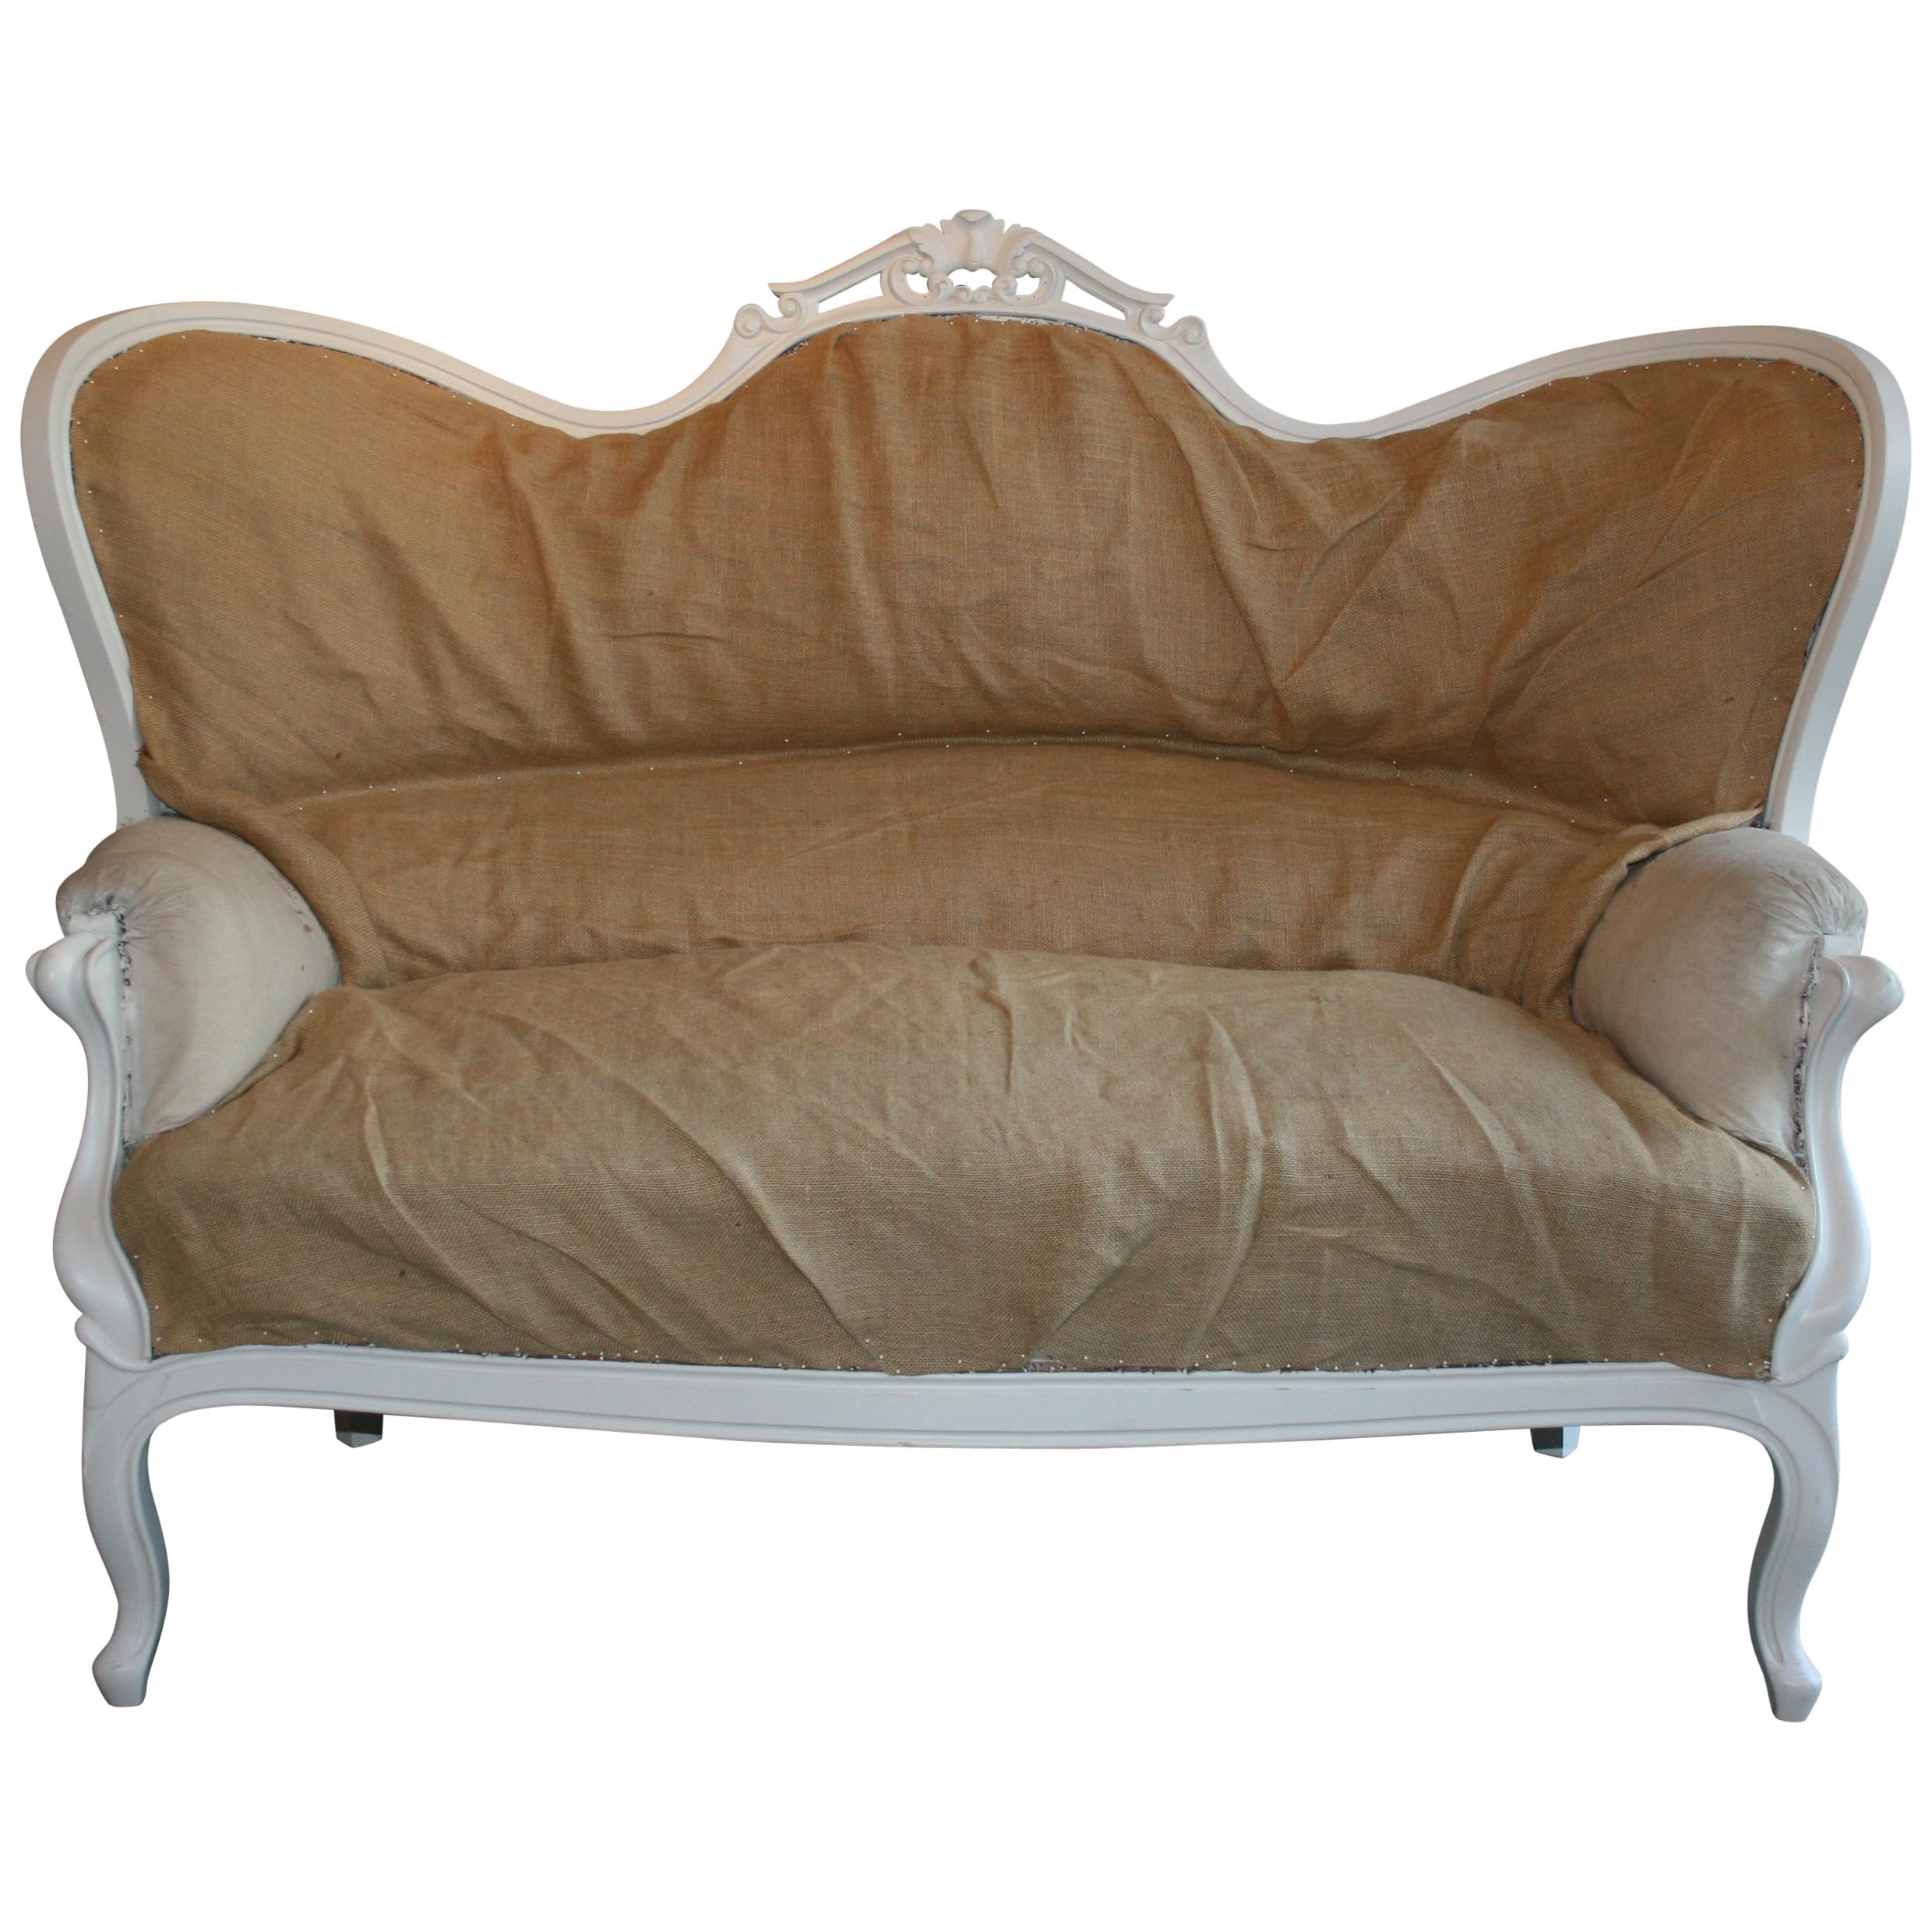 Louis Philippe Sofa in White, France, 19th Century, Prepared for Reupholstering